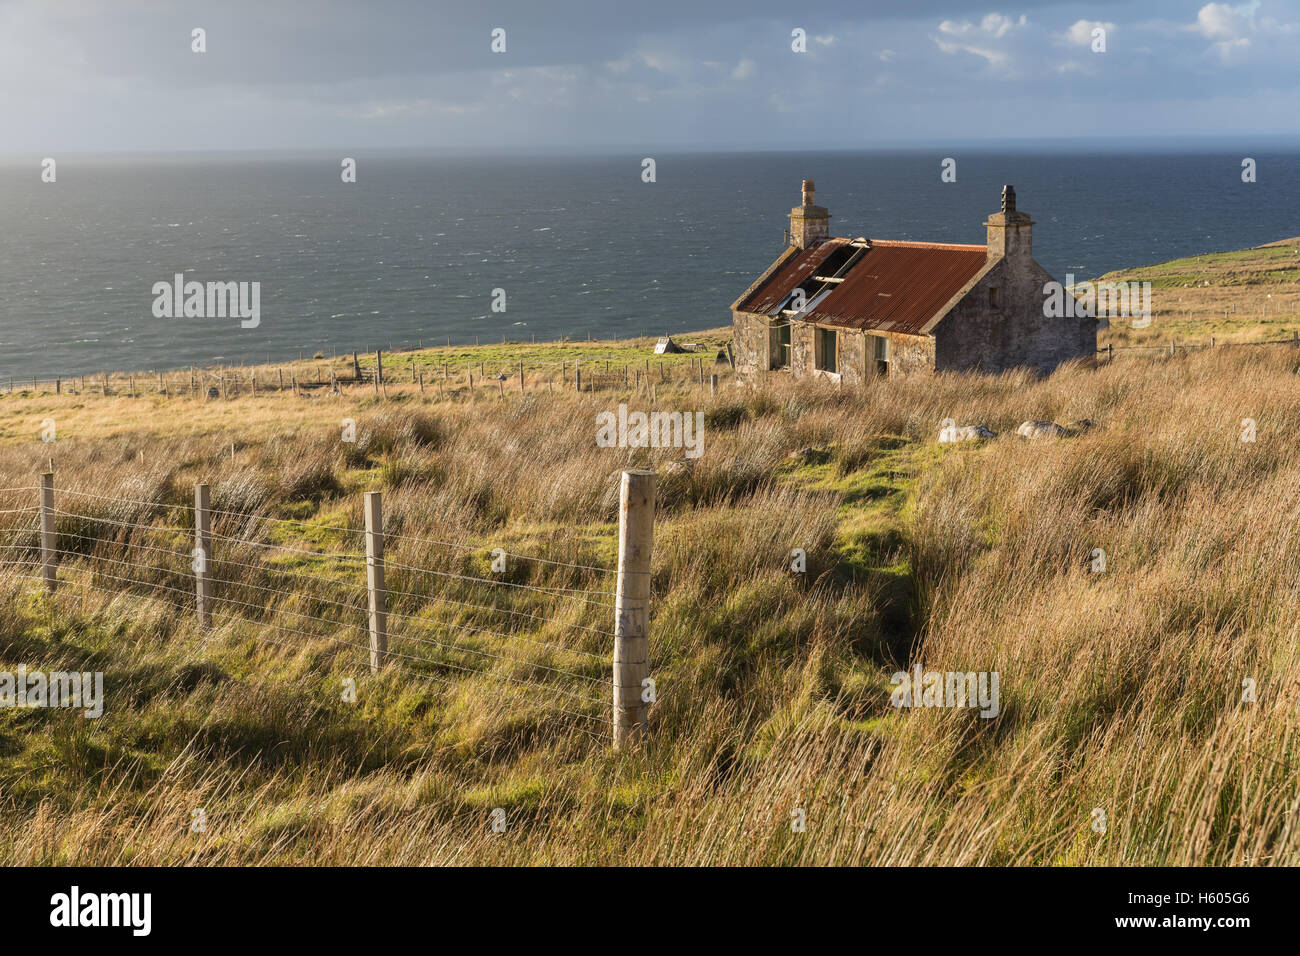 An abandoned croft house at Melvaig, a remote village on the coast of Wester Ross, Scottish Highlands. Stock Photo